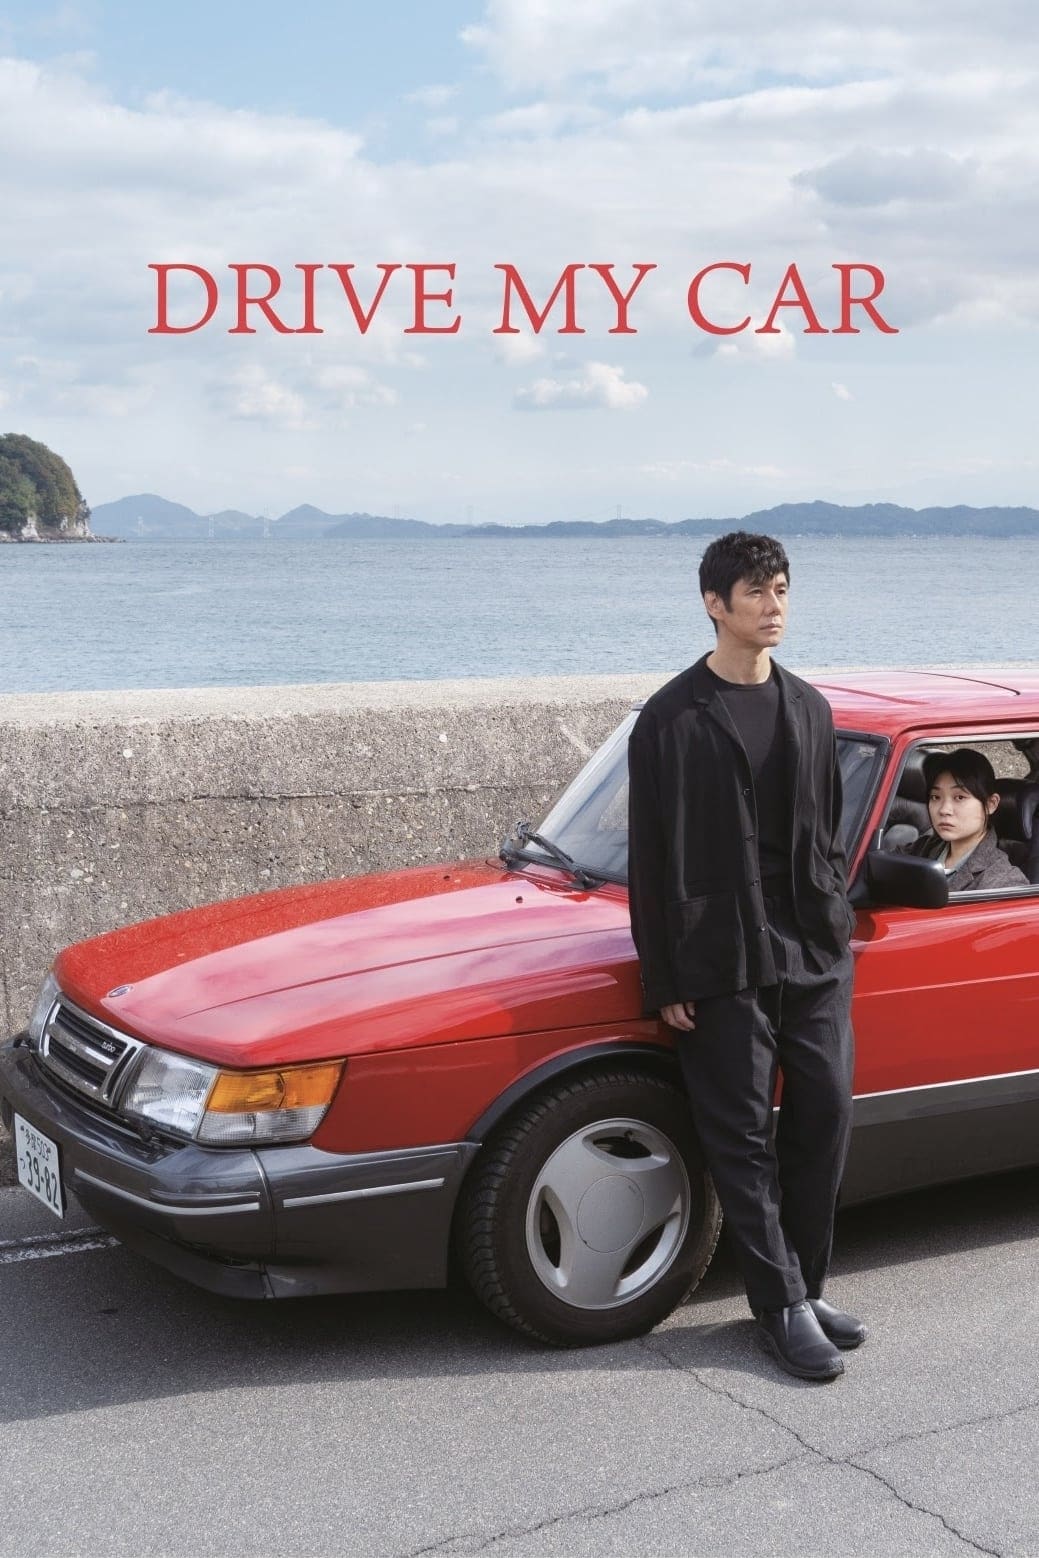 Drive My Car Movie poster